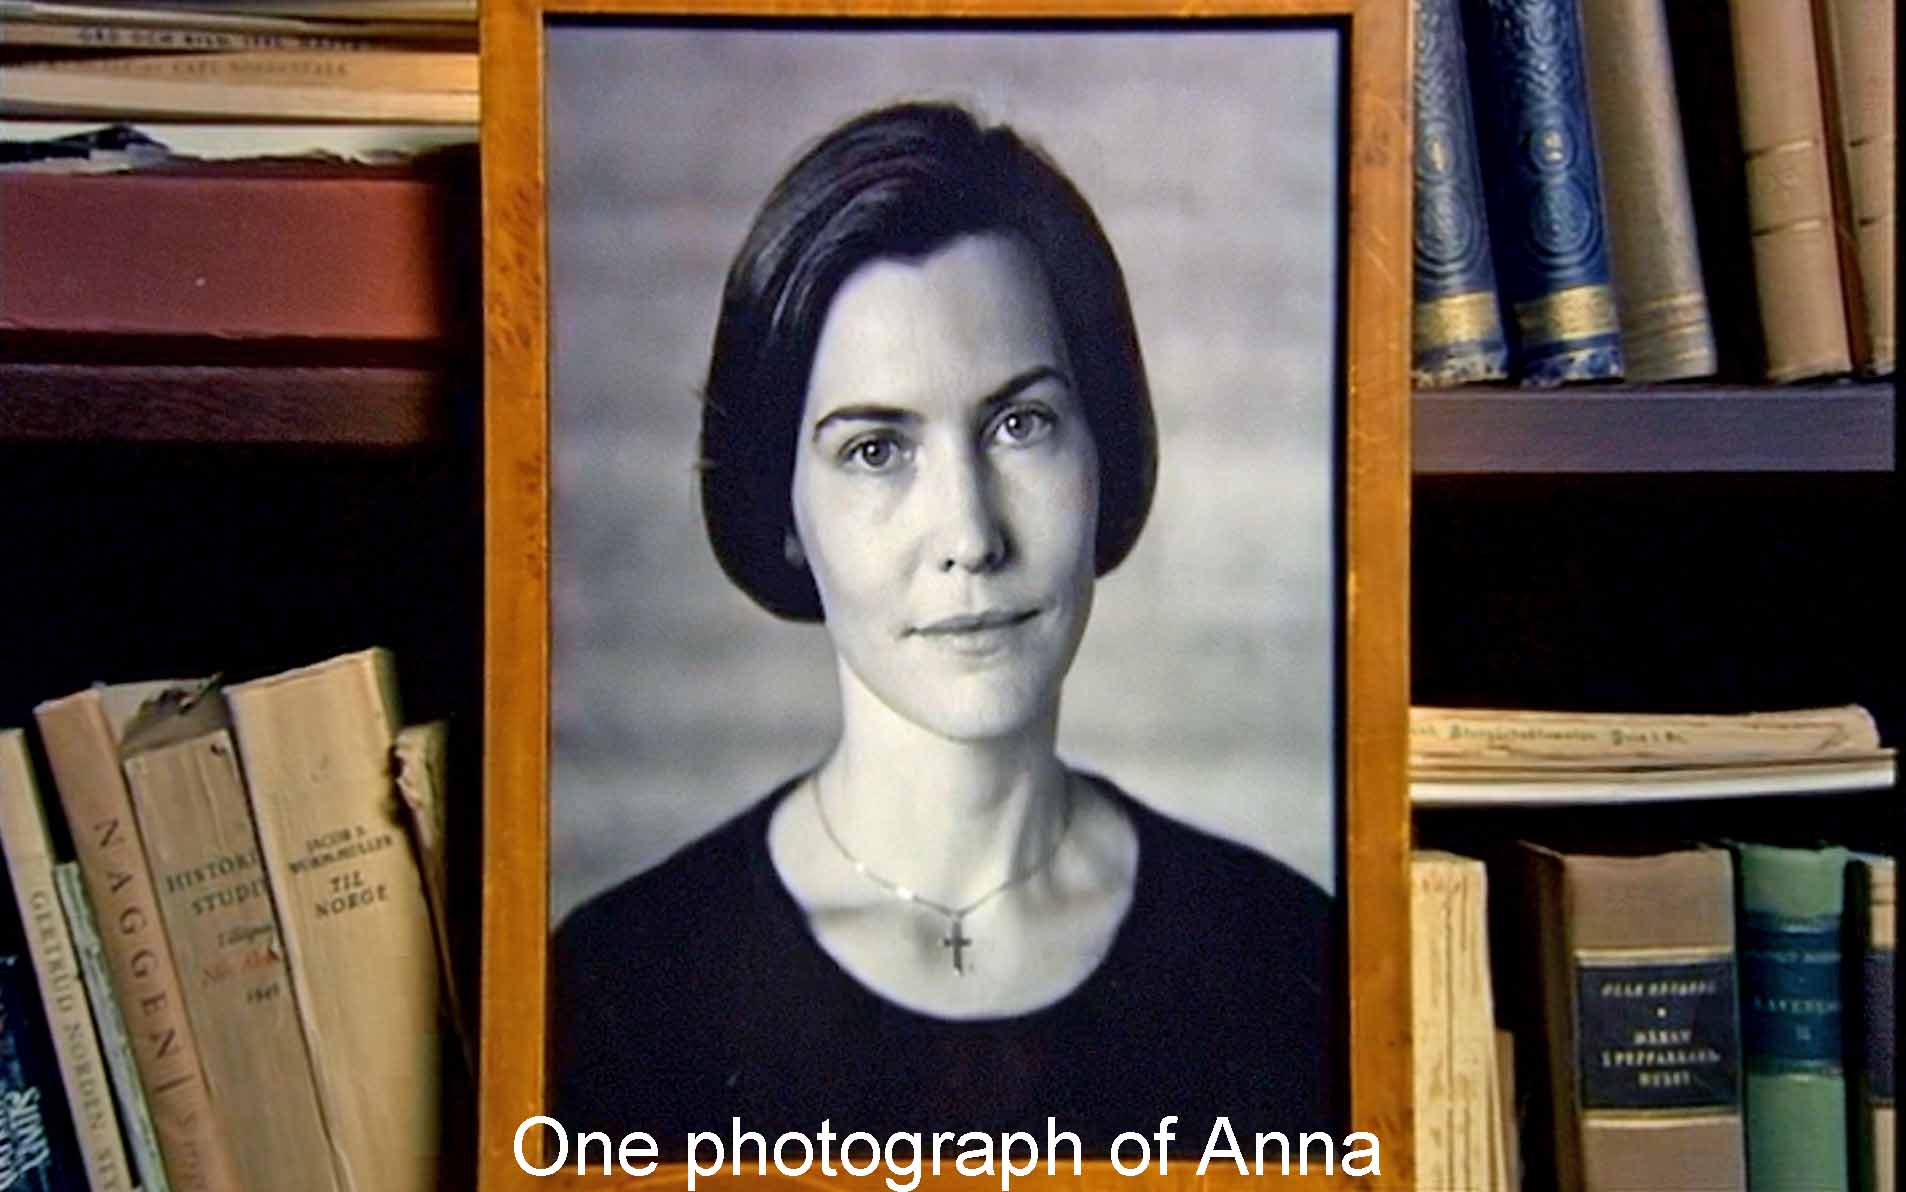 One photograph of Anna